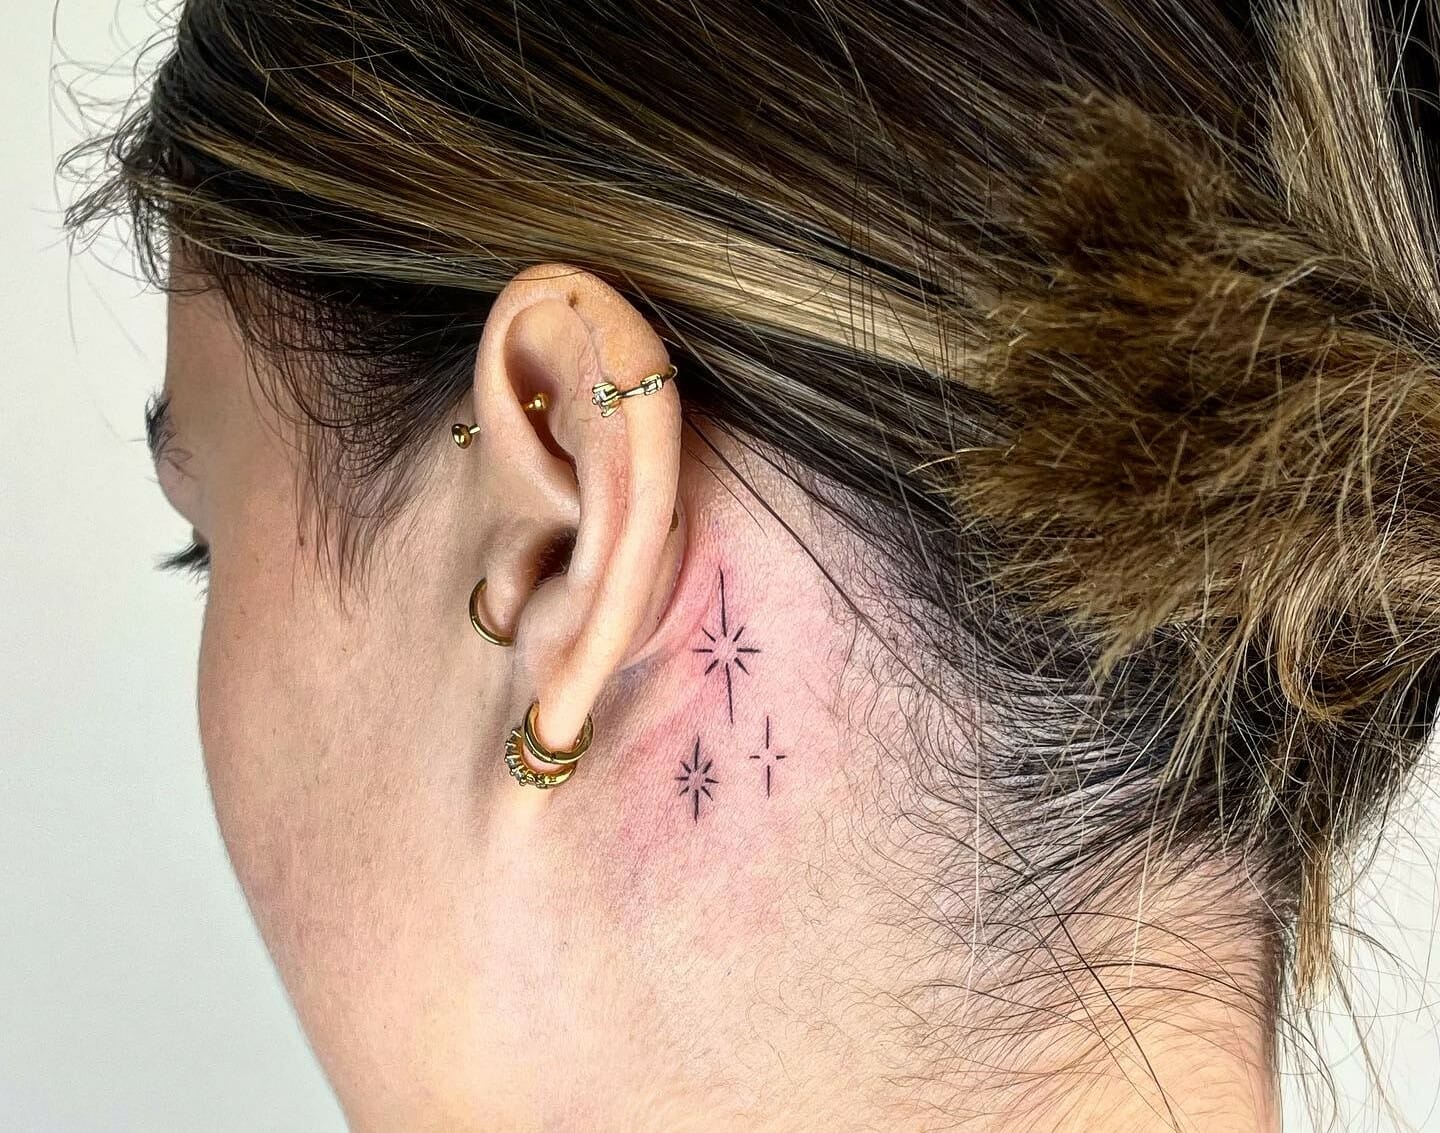 101 Best Star Tattoo Behind Ears Ideas That Will Blow Your Mind! - Outsons